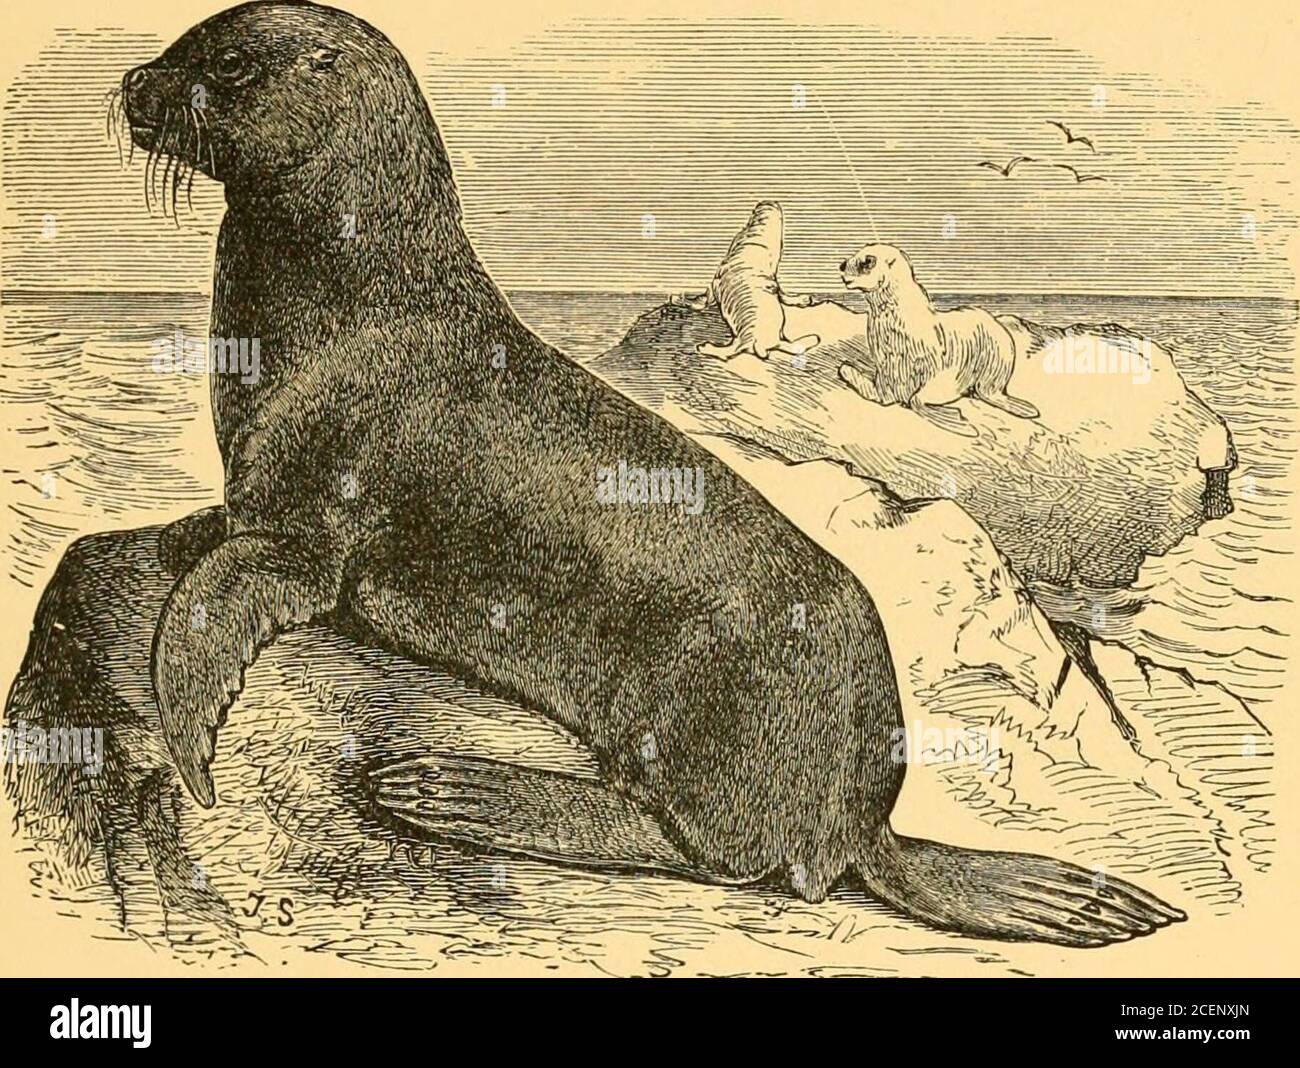 . The geography of mammals. h than the estuary of the La Plataon the American coast, where the Patagonian Sea-lion (Fig.41, p. 199) is met with, and the vicinity of the Cape onthe African coast, where Otaria jiusilla is found. But inthe Pacific, on the contrary, three distinct species of Otariaare distributed all over the northern portion of that ocean.Two species of Sea-lions are also met with in the Galapagos,and they likewise occur on the coasts of Peru and Chili.I think therefore we may assume that Otaria was origin-ally an Antarctic form, but has travelled northwards alongthe West-America Stock Photo